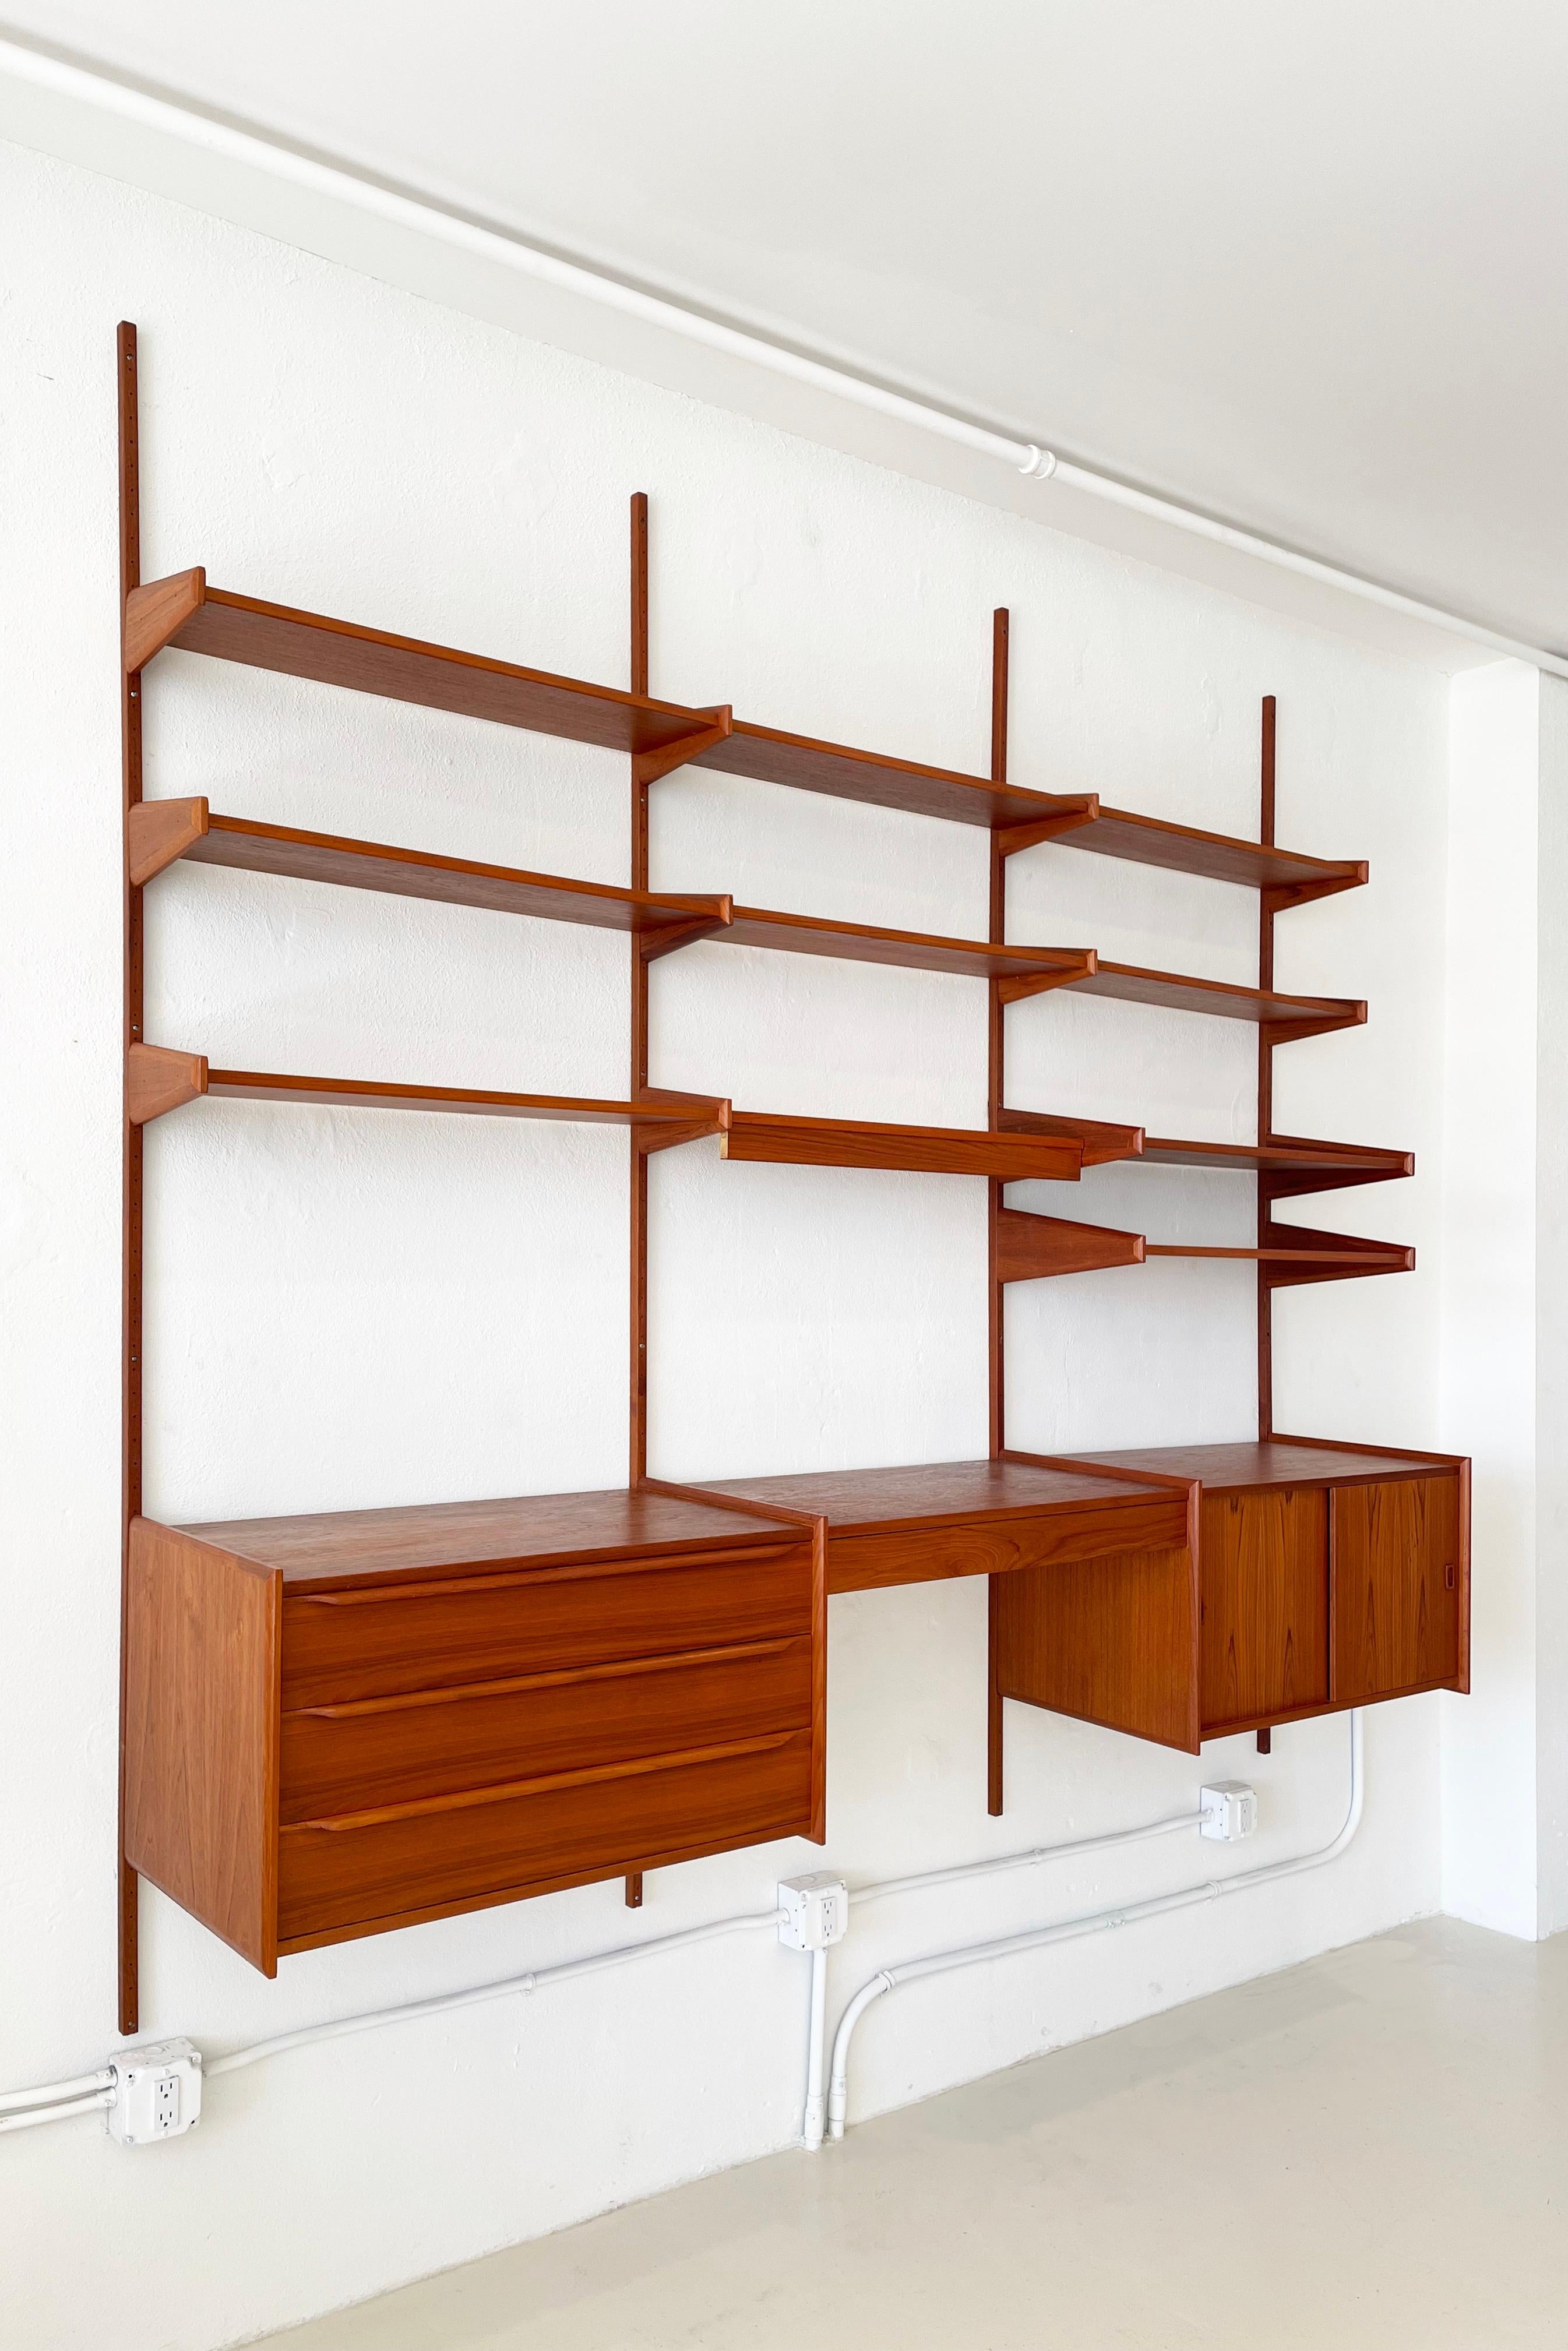 Exceptionally maintained Pega wall unit from the 1960s by Juul Christensen

Originally manufactured and sold by Arhtur Soltvedt Møbelfabrik

This item in its entirety, as shown, was retrieved from a single property. All pieces fit together well